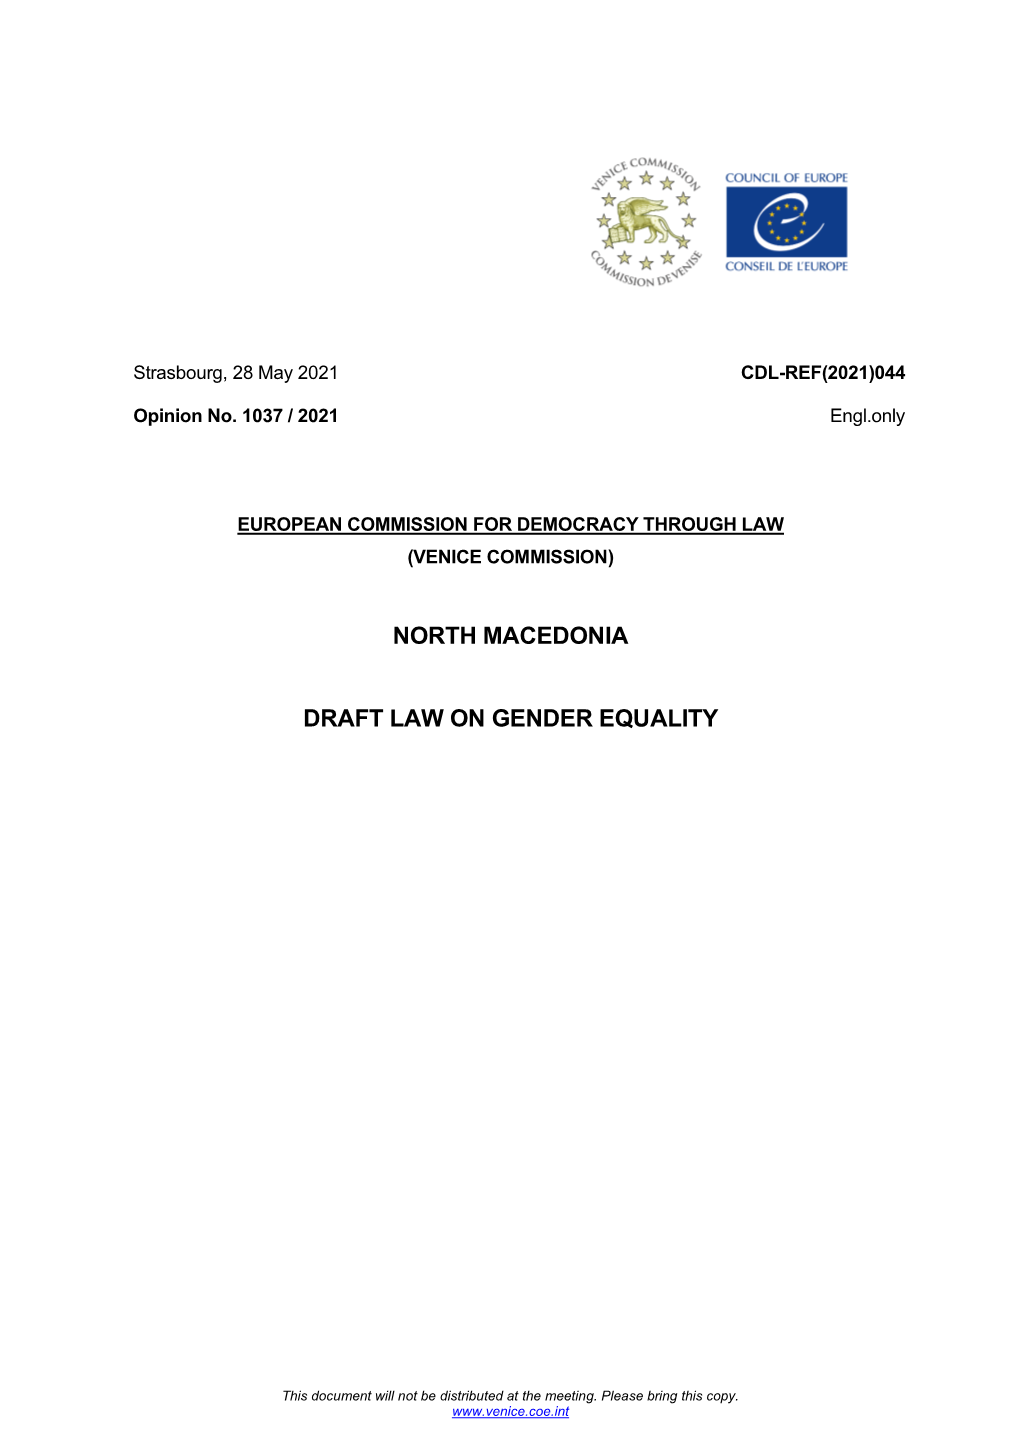 North Macedonia Draft Law on Gender Equality